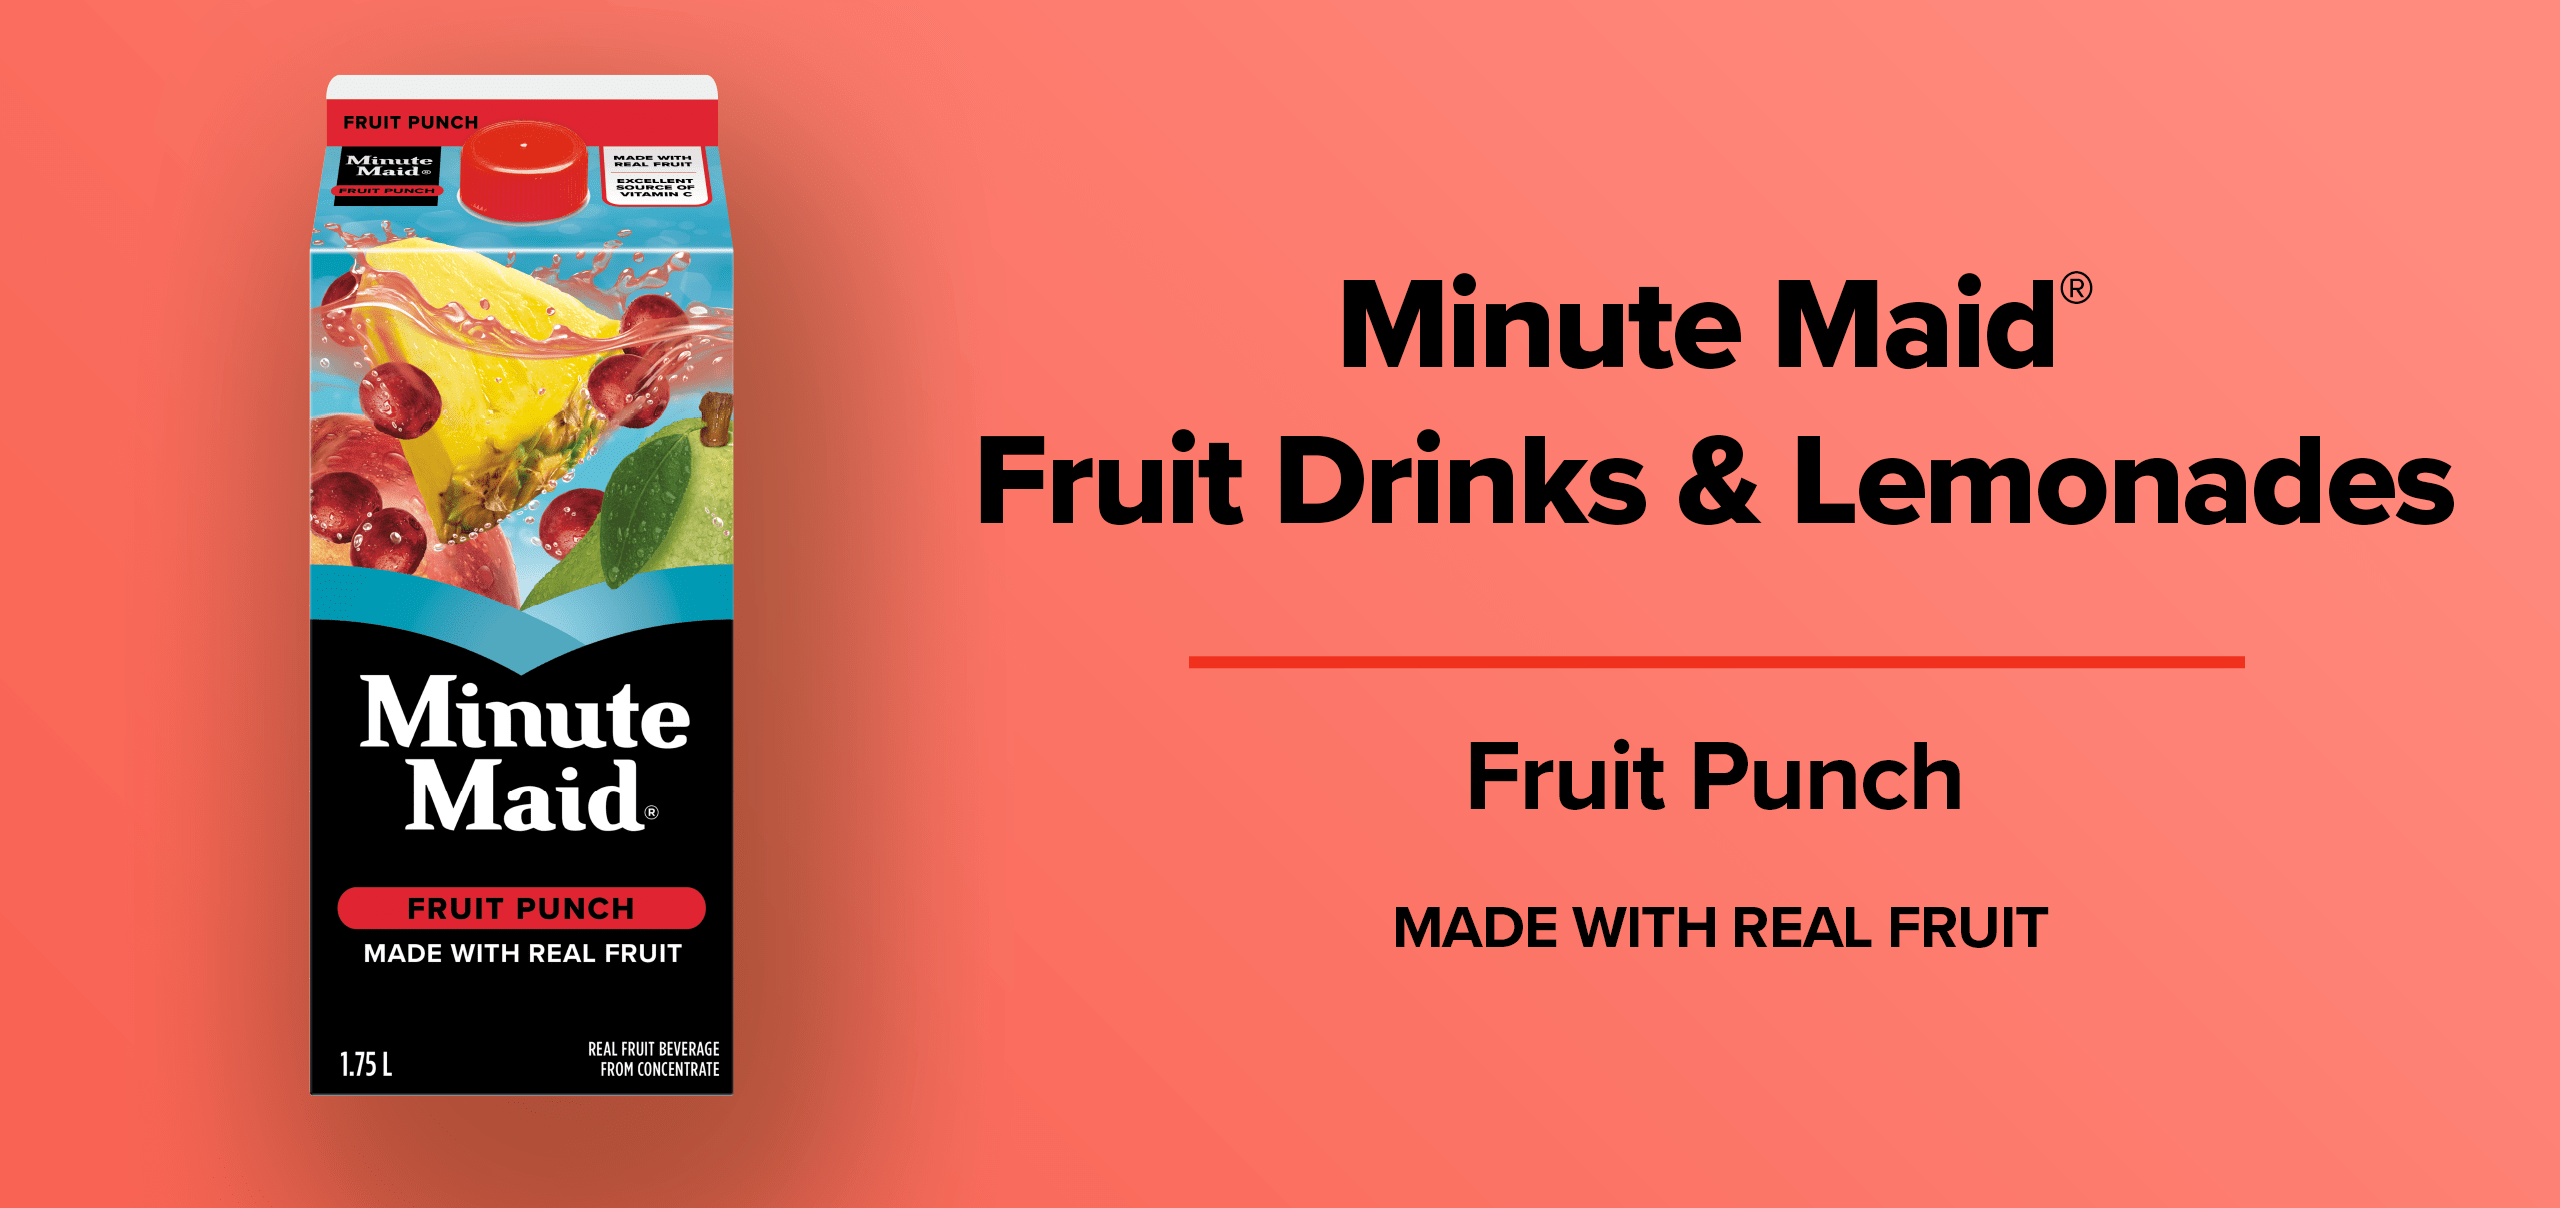 Minute Maid Fruit Drinks. Fruit Punch. Made with Real Fruit.